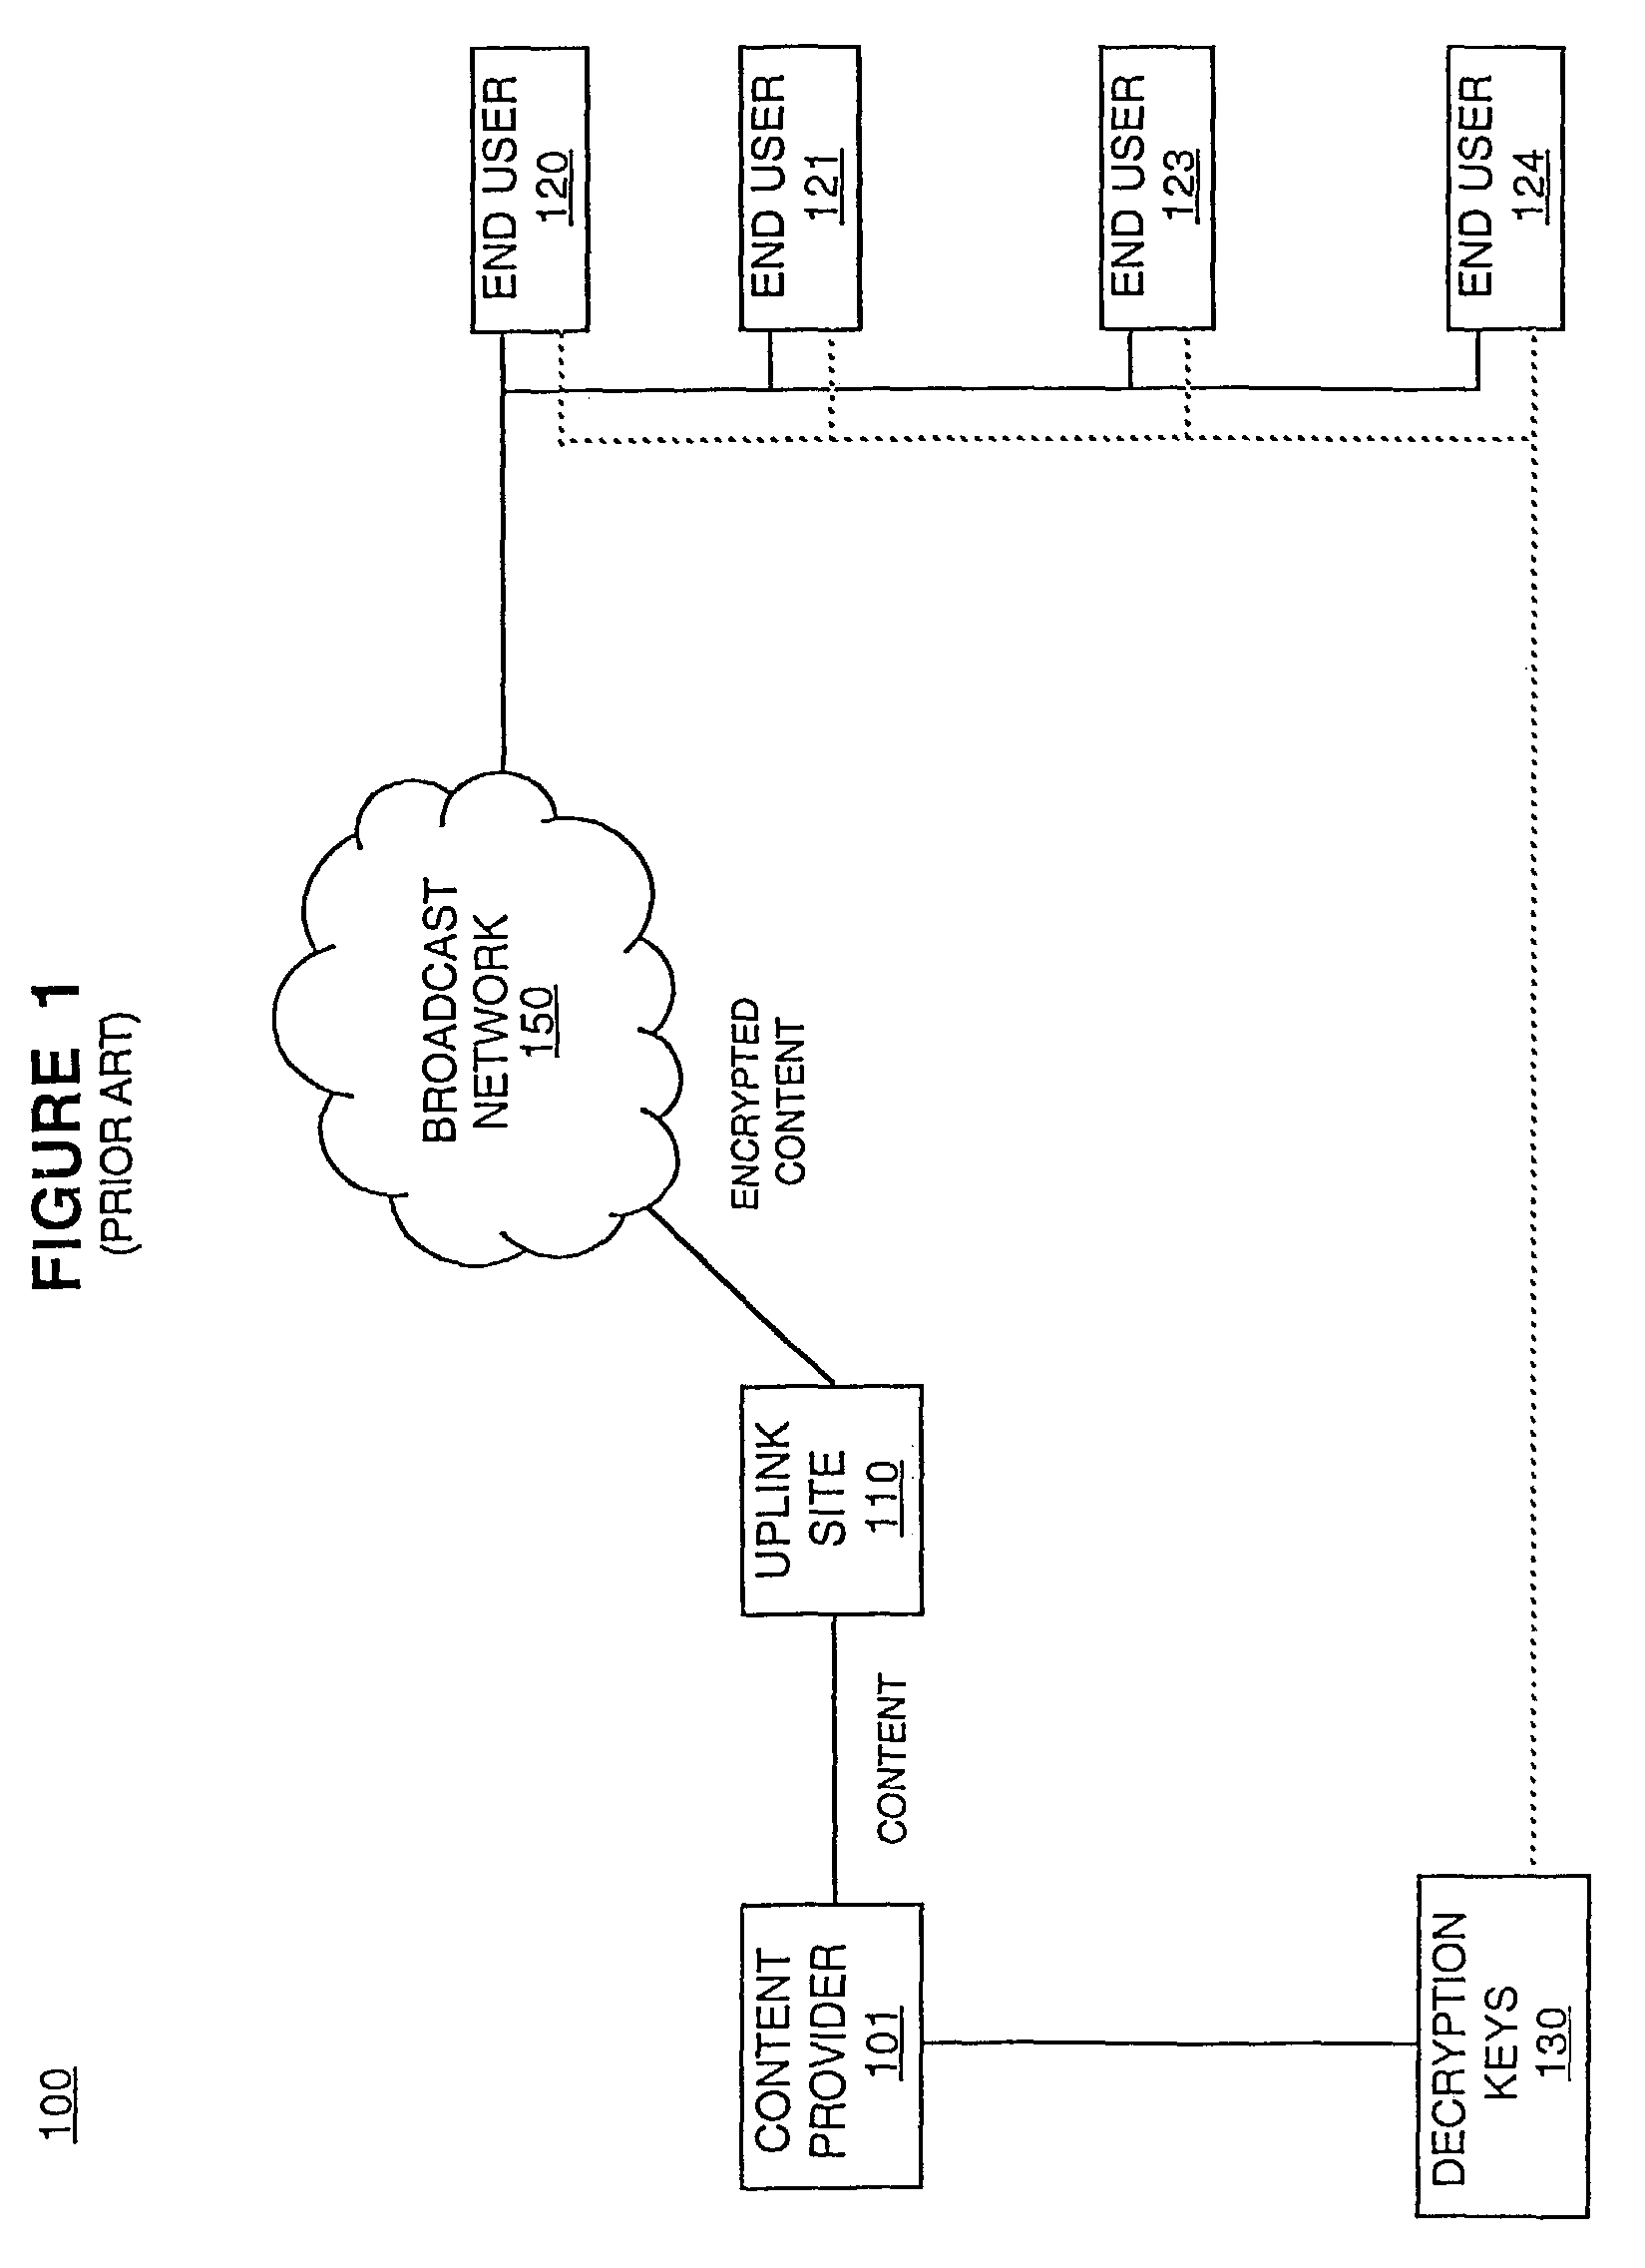 Method and system for implementing digital rights management